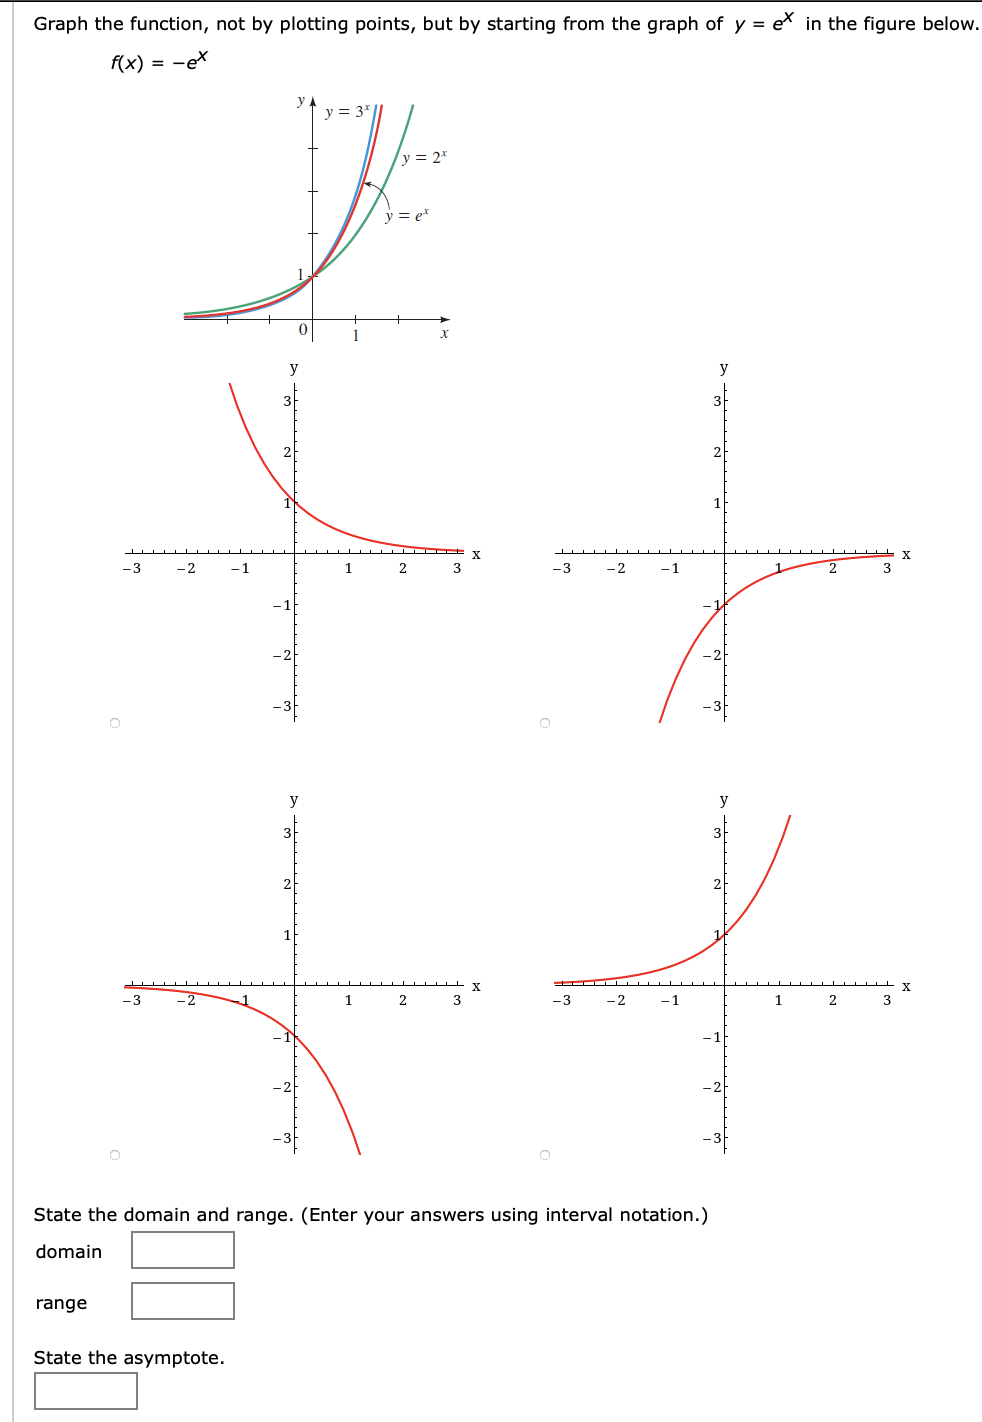 Graph the function, not by plotting points, but by starting from the graph of y = e* in the figure below.
f(x) = -ex
= 3*
y = 2*
y = e*
1
-3
-2
-1
3
-3
-2
-1
3
y
X
1
2
3
-3
-2
-1
1
2
3
State the domain and range. (Enter your answers using interval notation.)
domain
range
State the asymptote.
